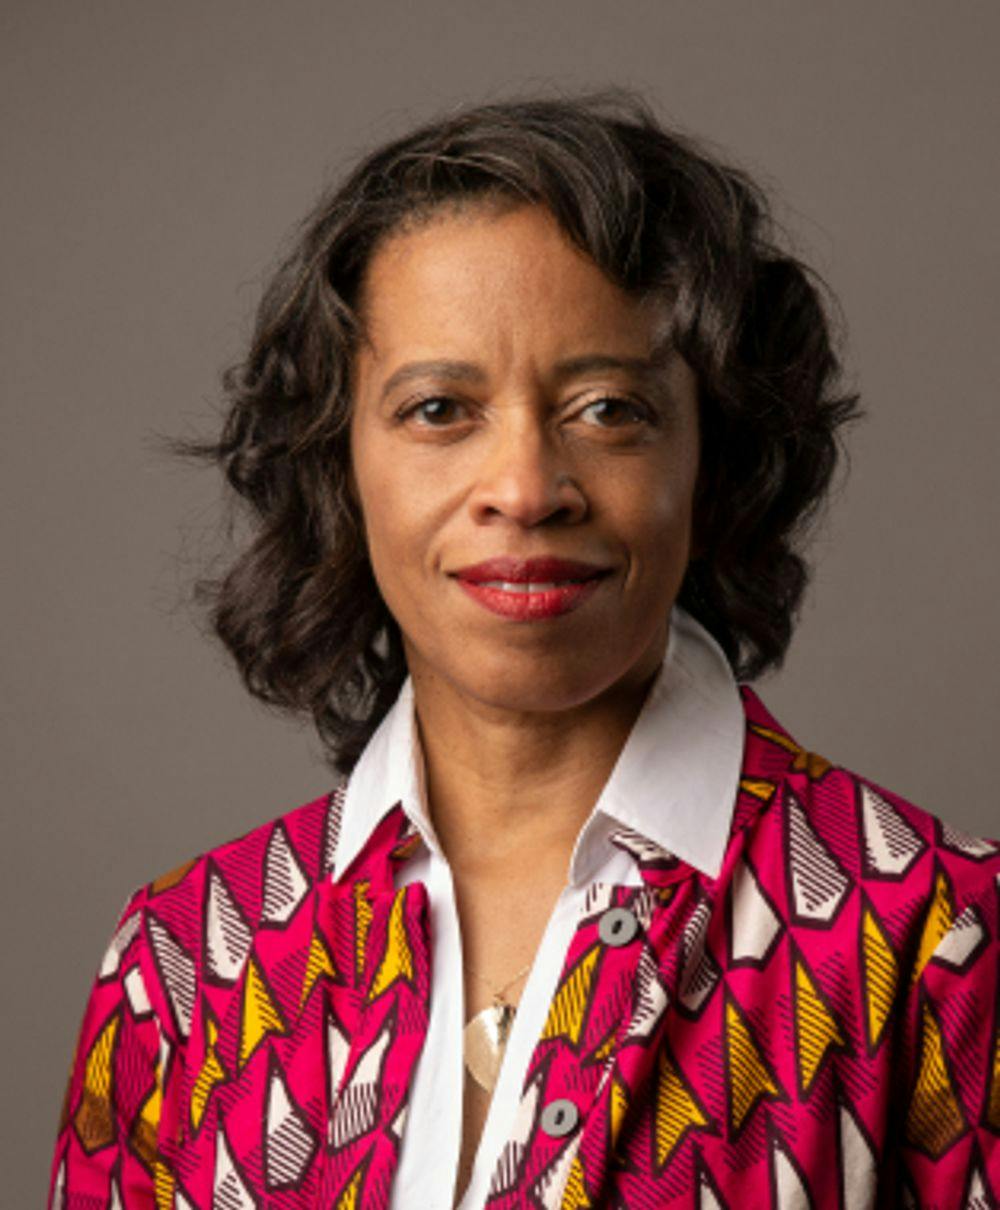 Rhonda Magee - Rhonda is a law professor at the University of San Francisco, mindfulness teacher, fellow of the Mind & Life Institute, and author of "The Inner Work of Racial Justice" 